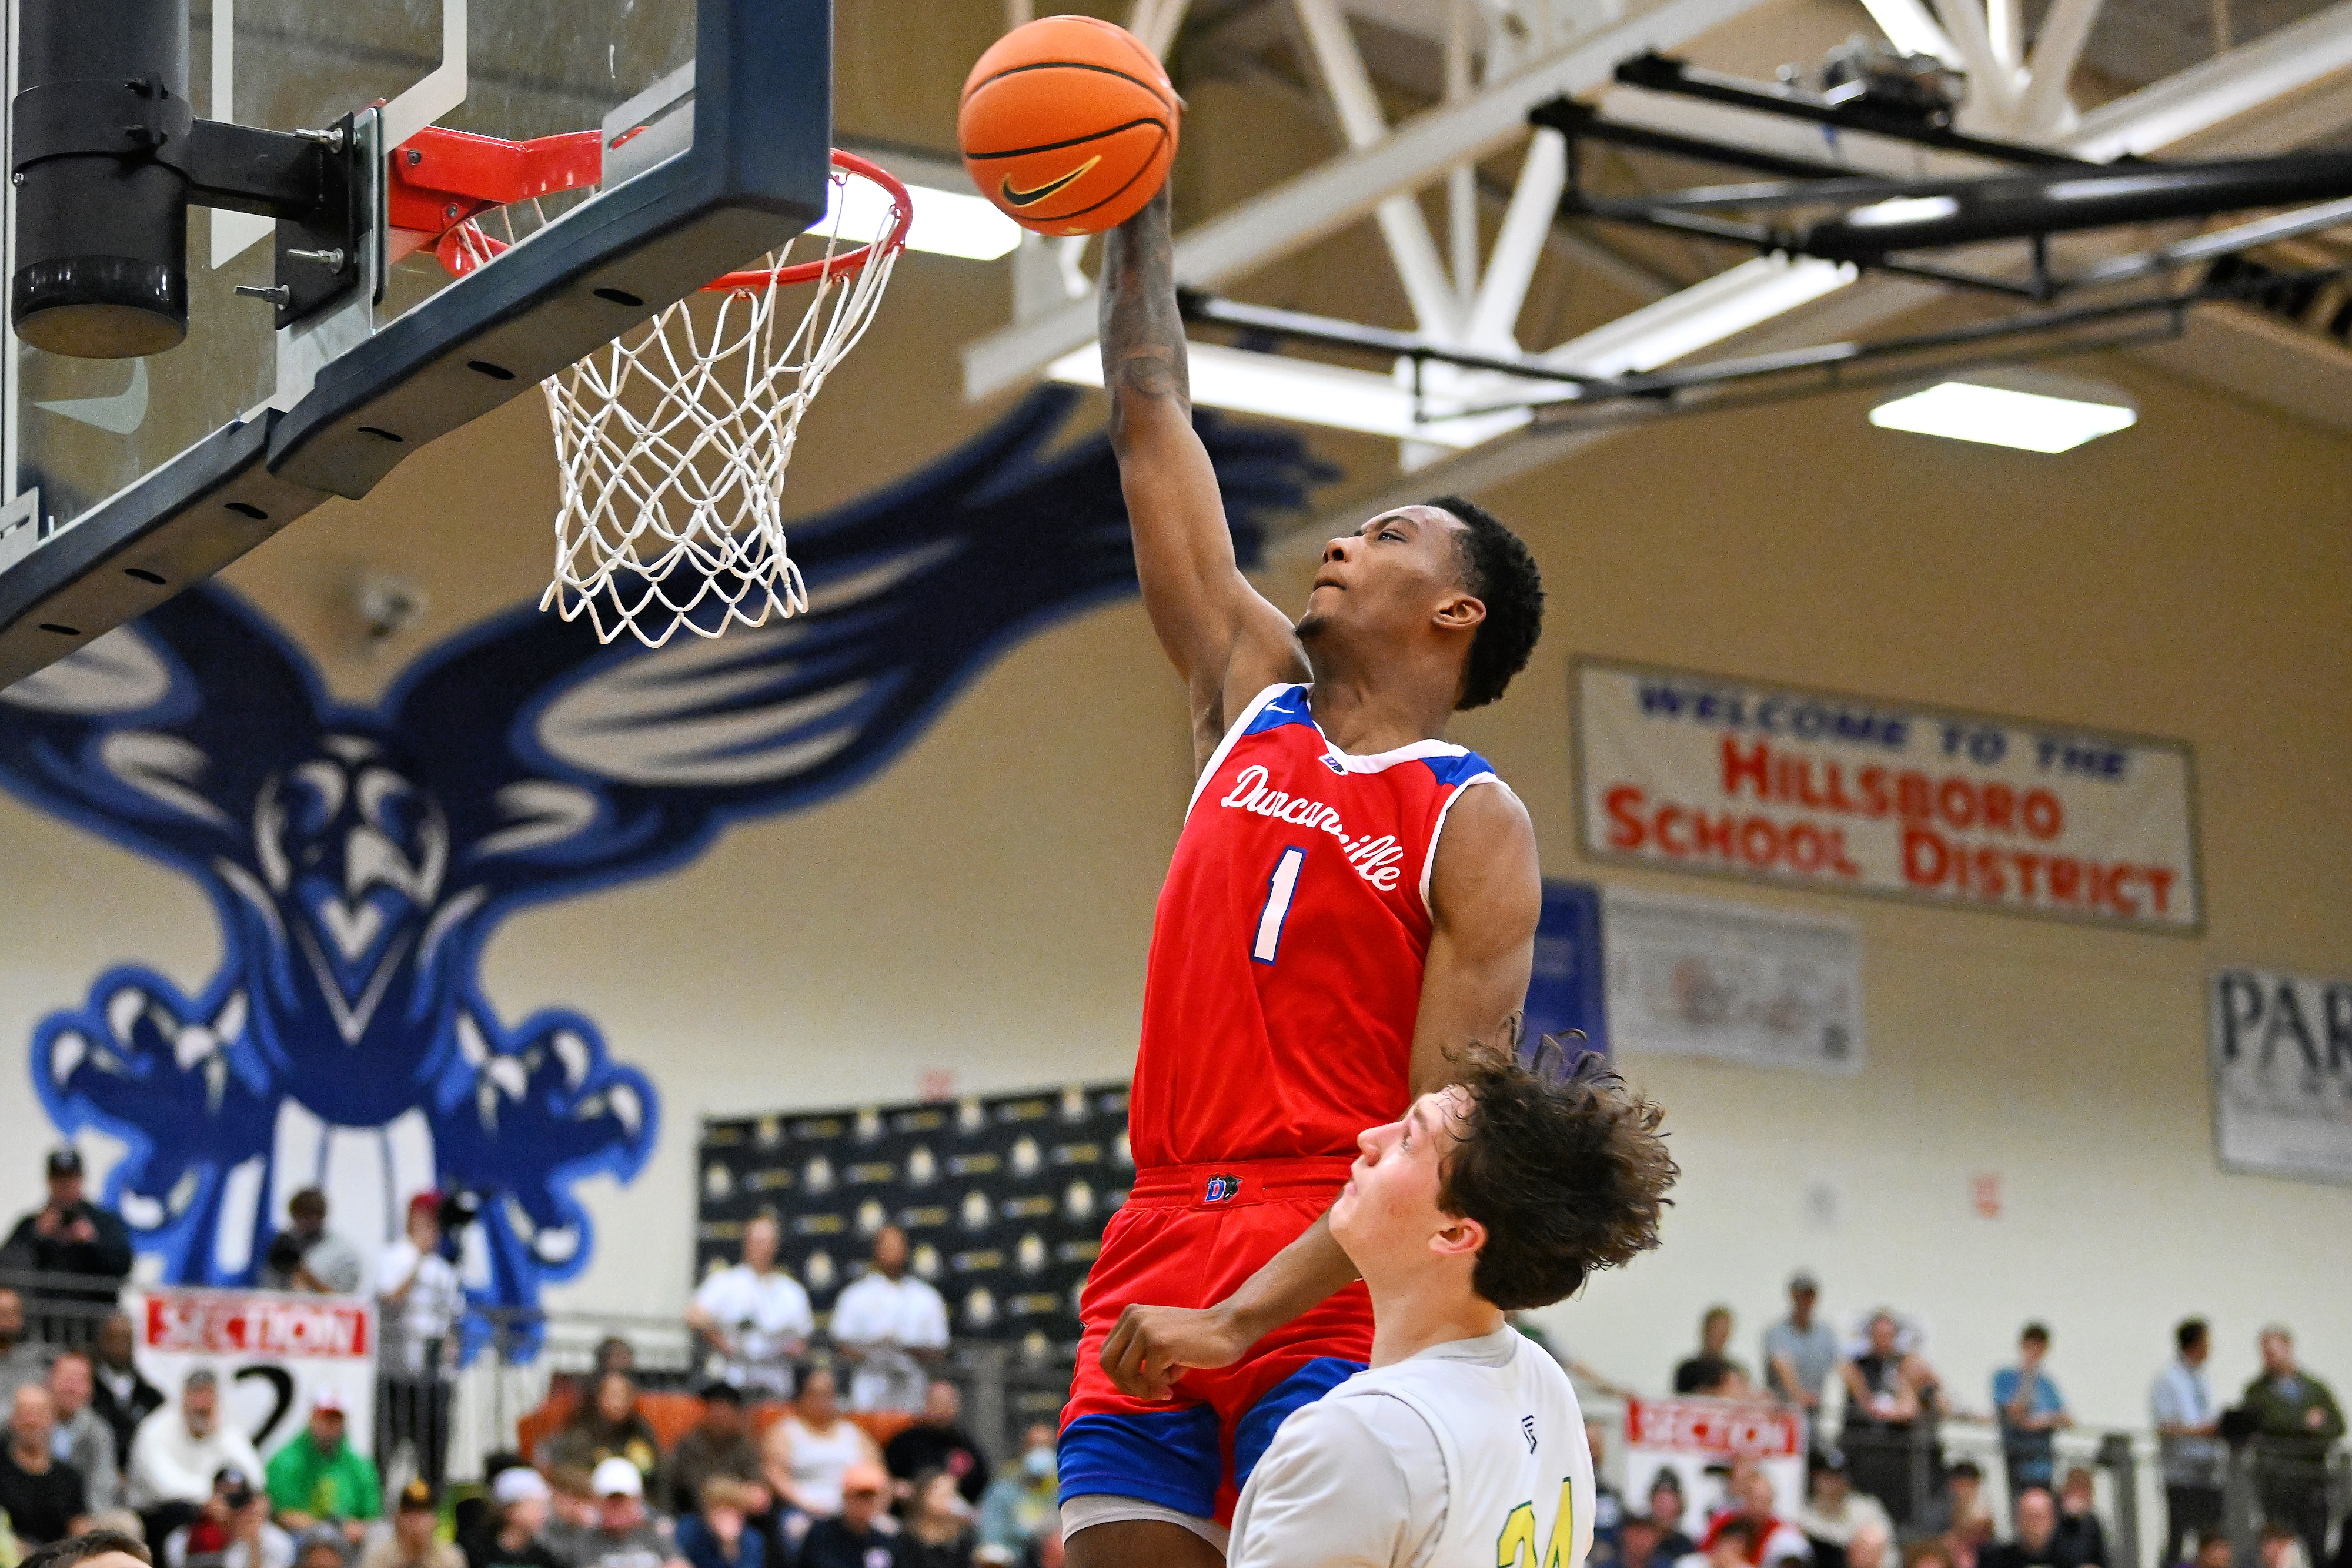 Ron Holland rises above a defender during the Les Schwab Invitational in Oregon in December.